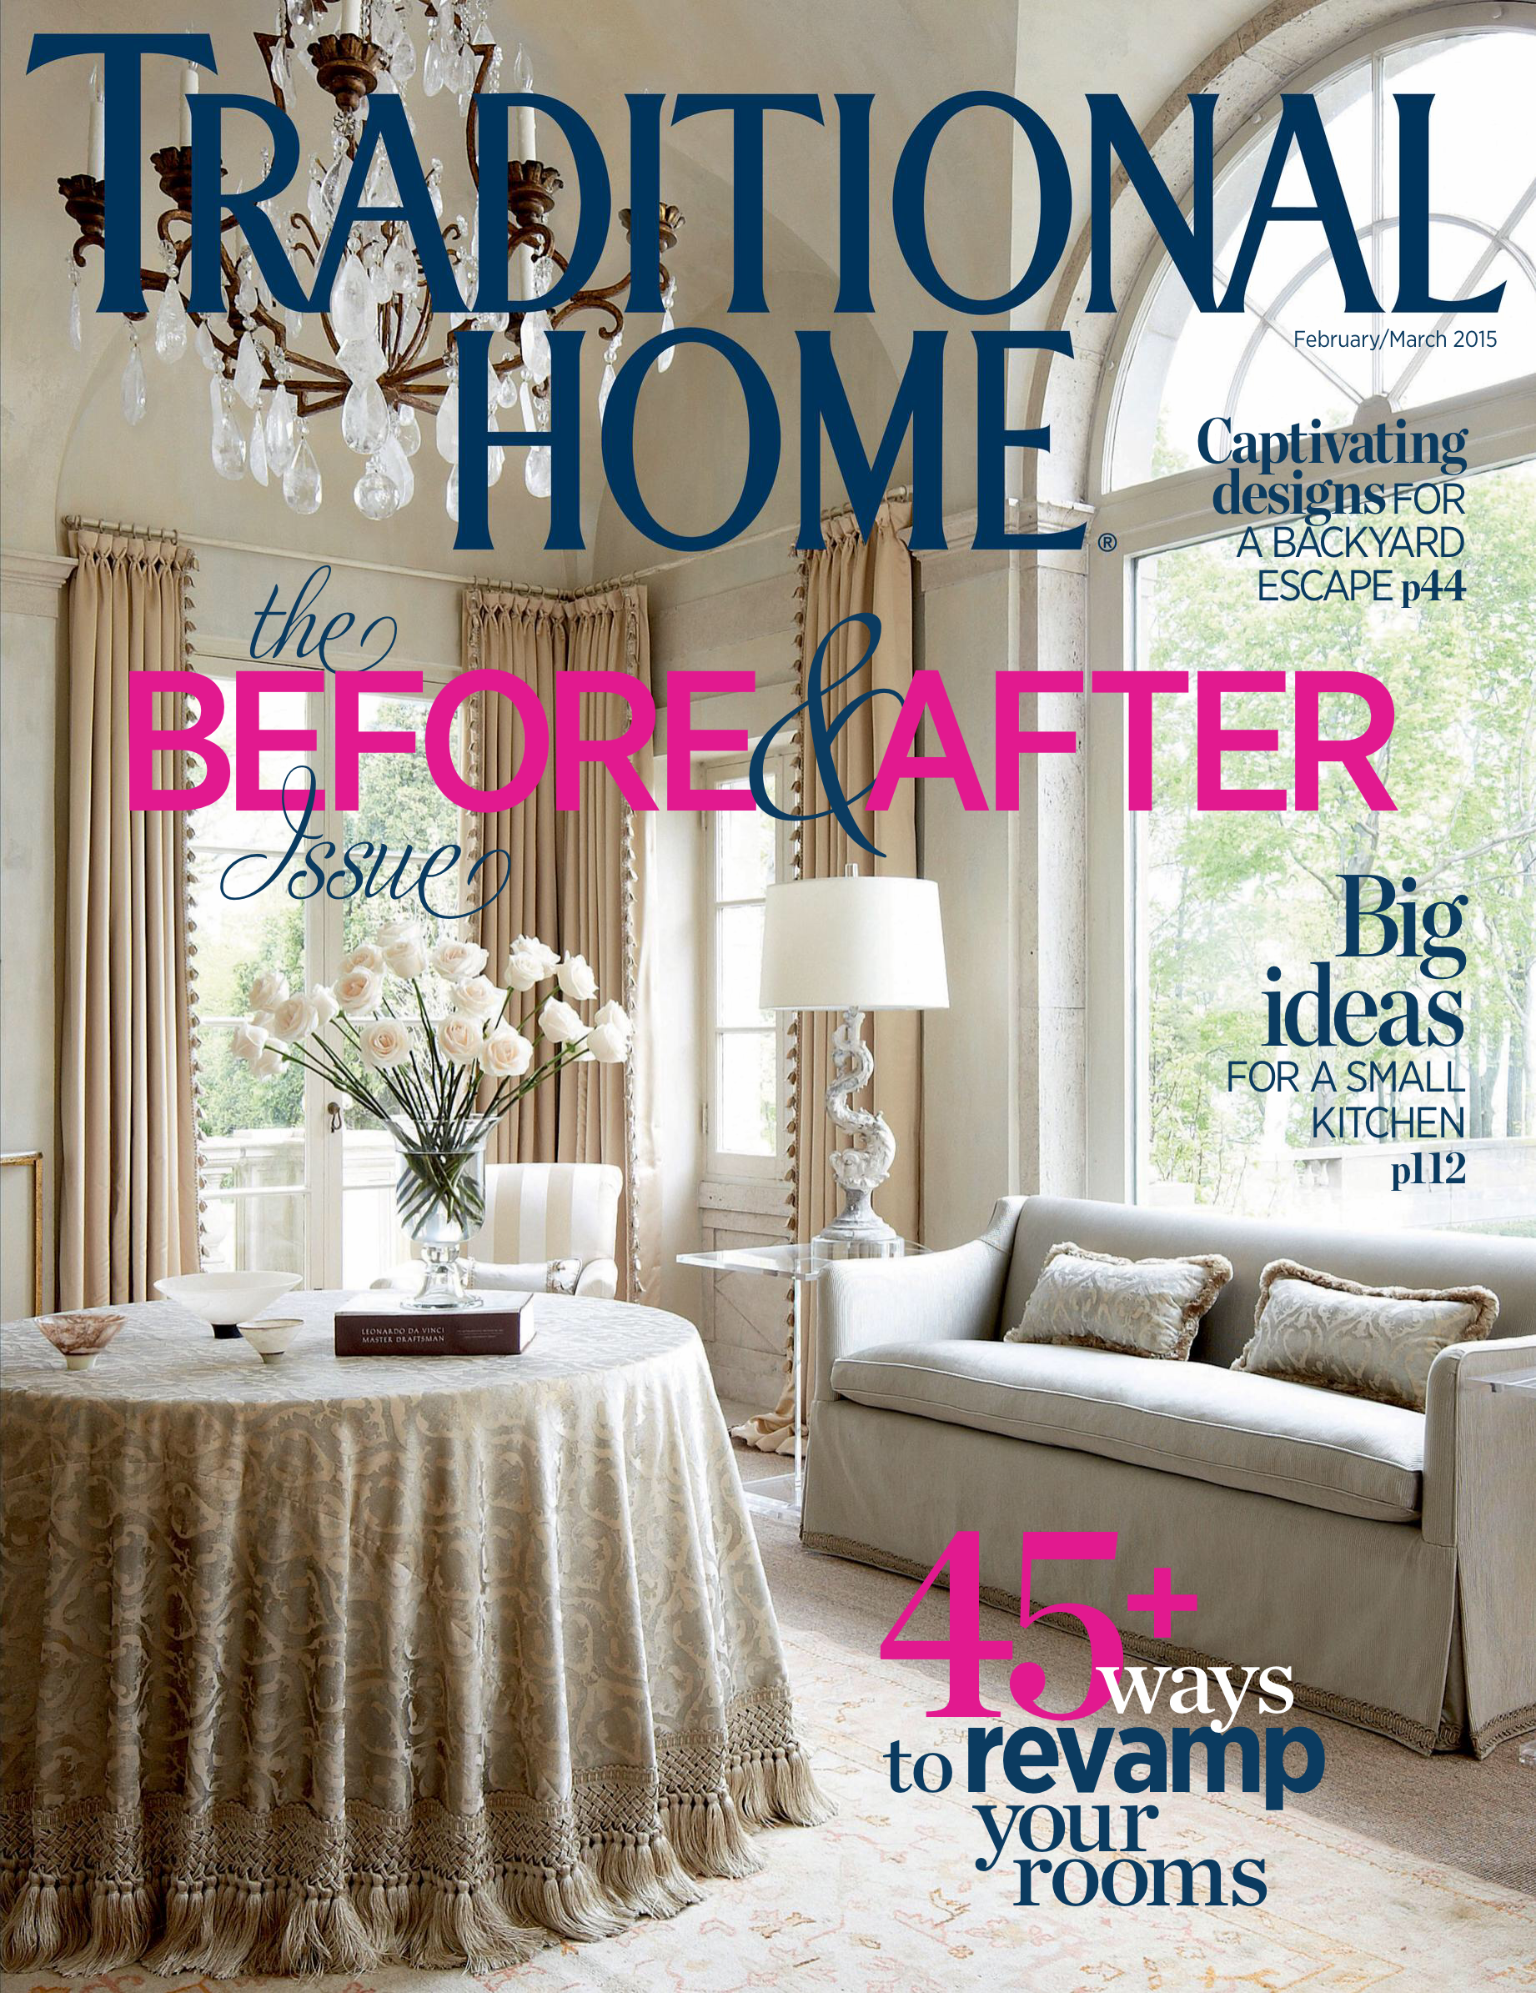 TraditionalHome_Harlow_FebMarch2015.png